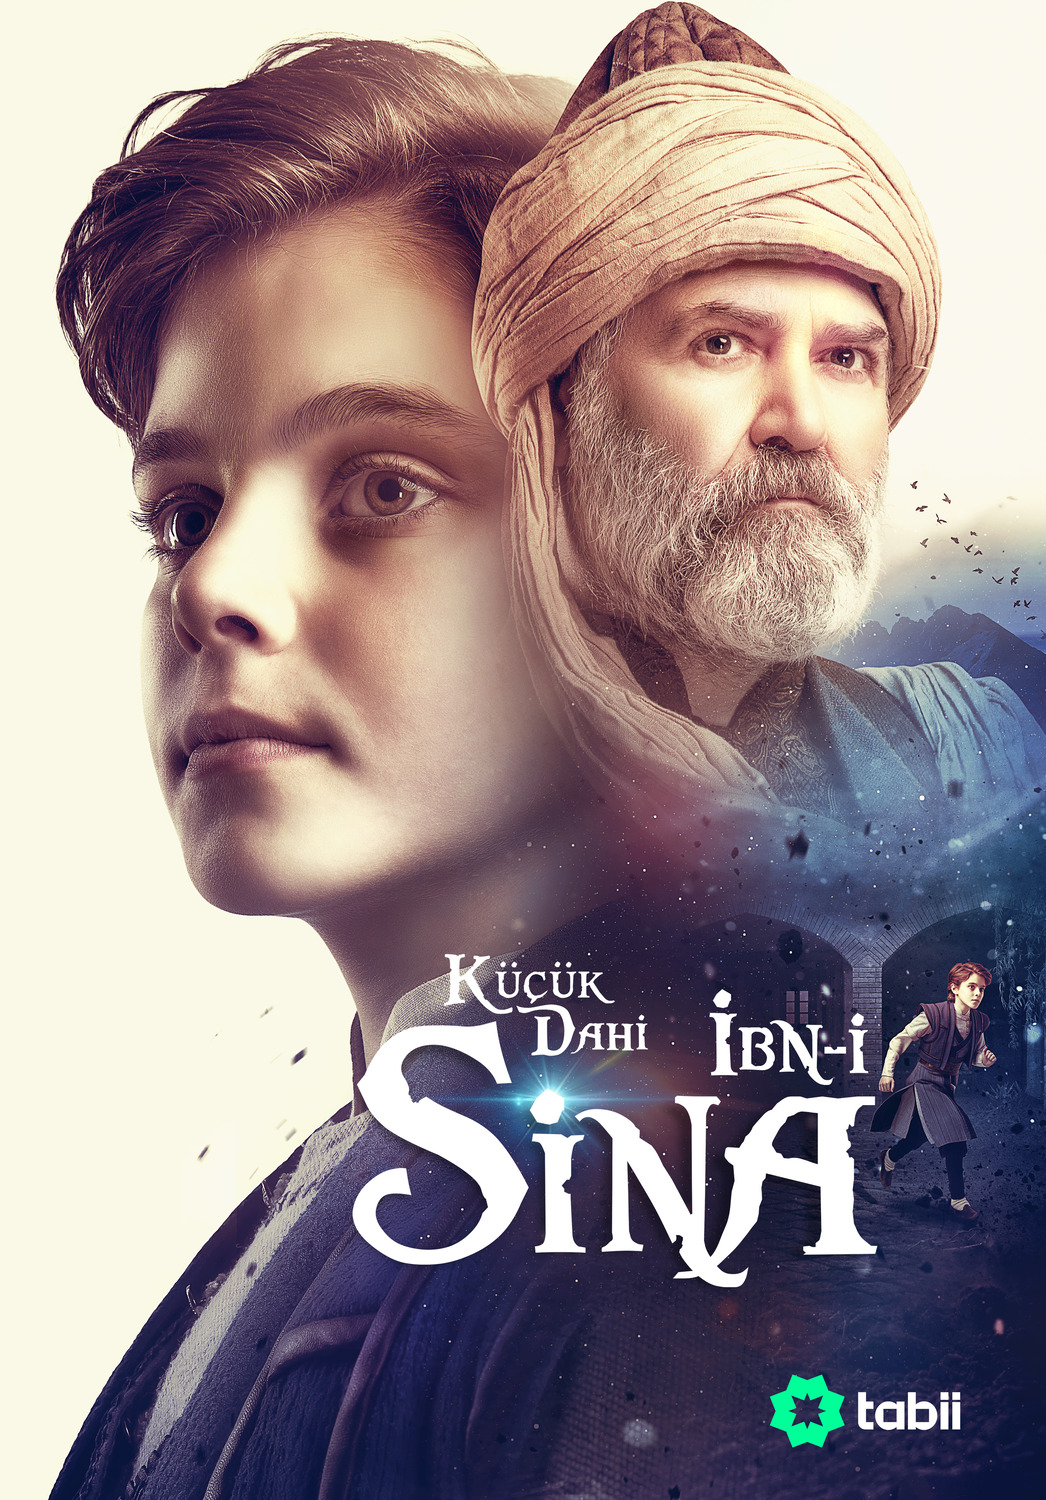 Extra Large TV Poster Image for Ibn-I Sina (#2 of 7)